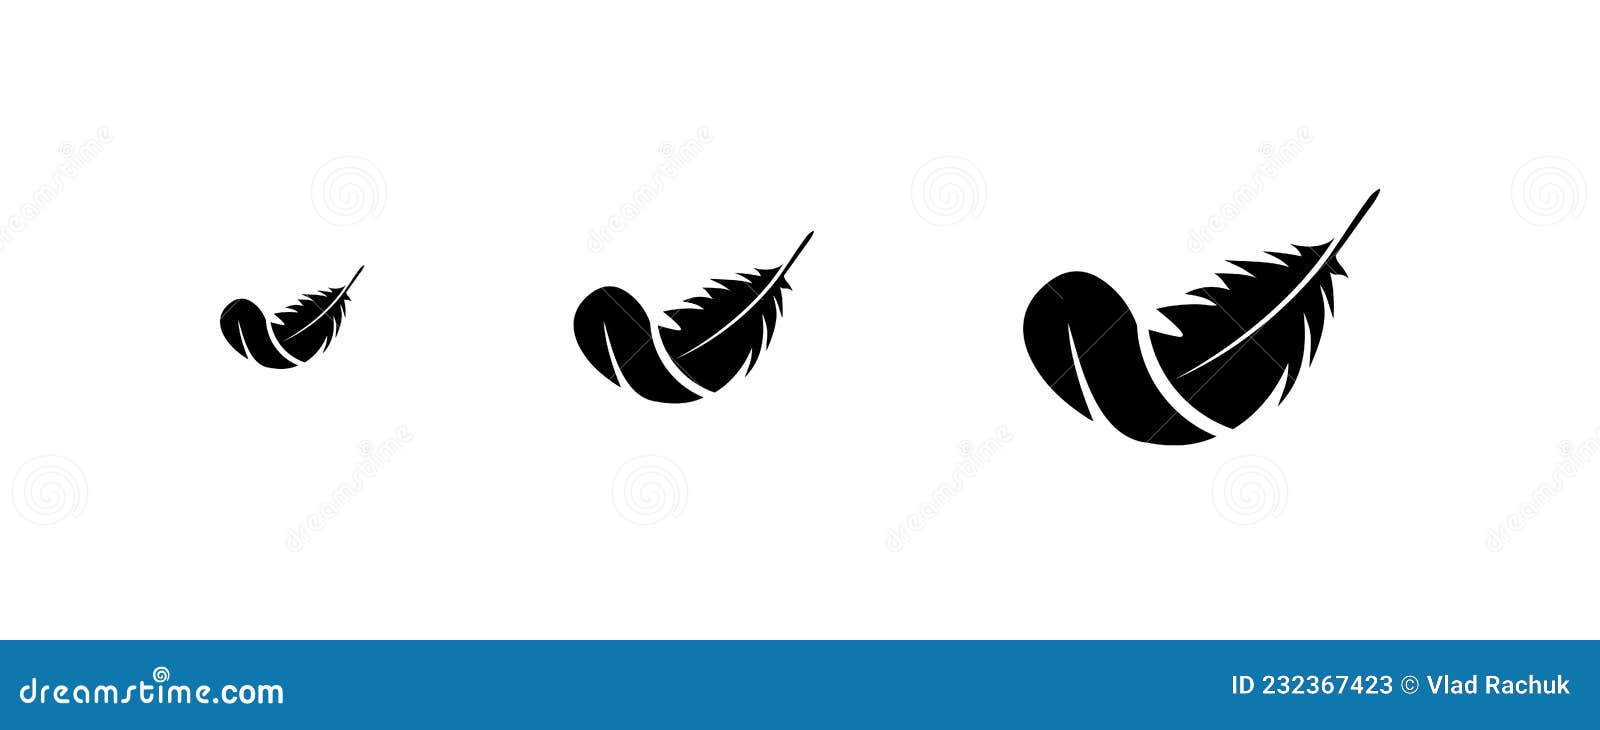 Goose feathers of various shapes and colors Vector Image